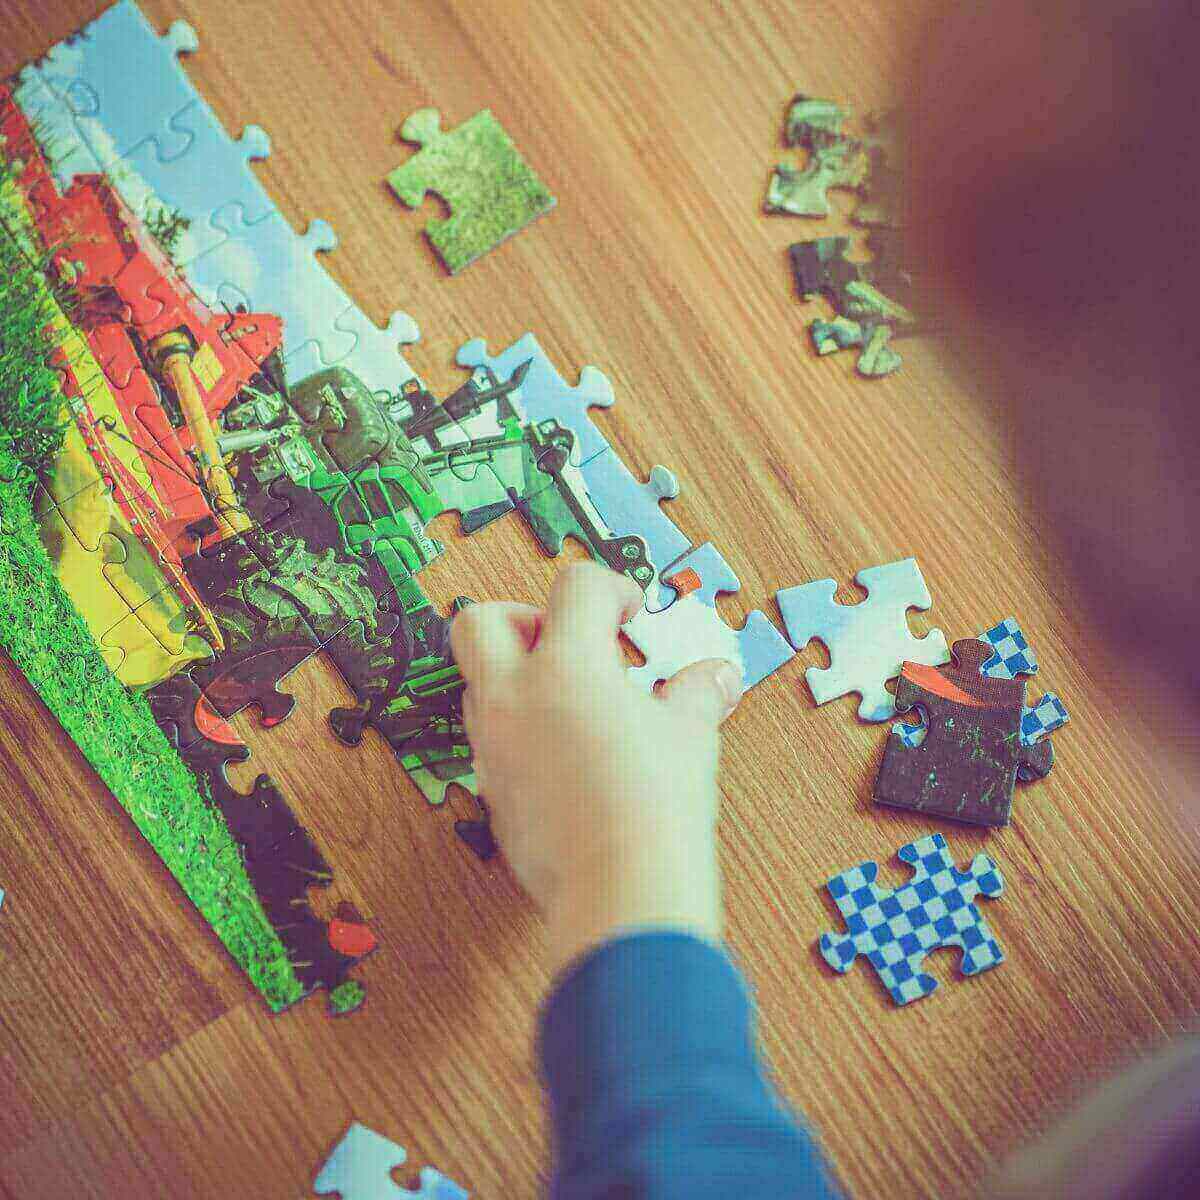 The hand of a toddler is putting together a puzzle on a wood floor with a red and green tractor on it.